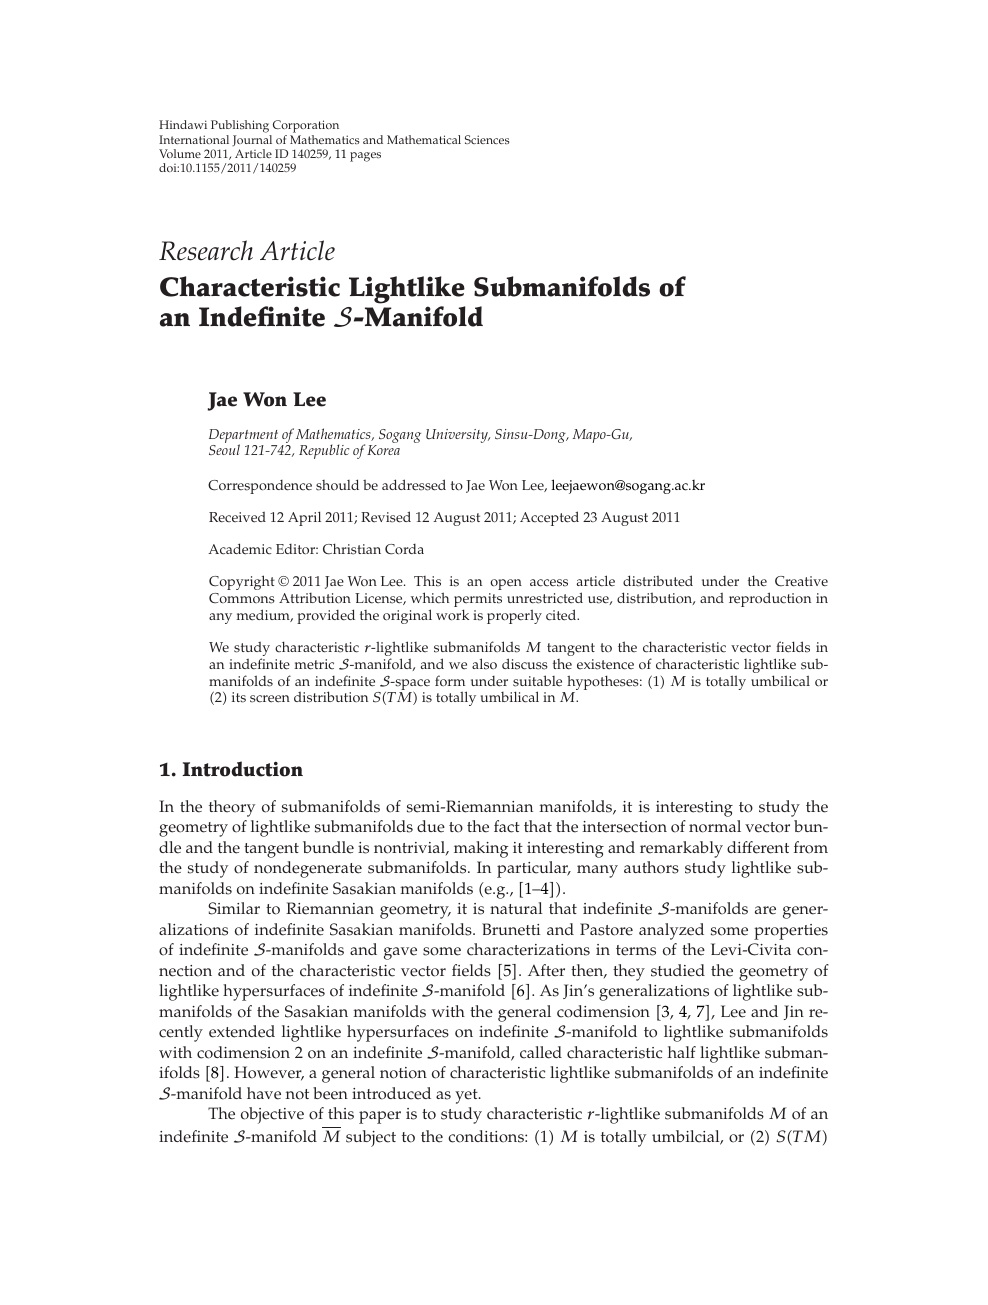 Characteristic Lightlike Submanifolds Of An Indefinite S Manifold Topic Of Research Paper In Mathematics Download Scholarly Article Pdf And Read For Free On Cyberleninka Open Science Hub